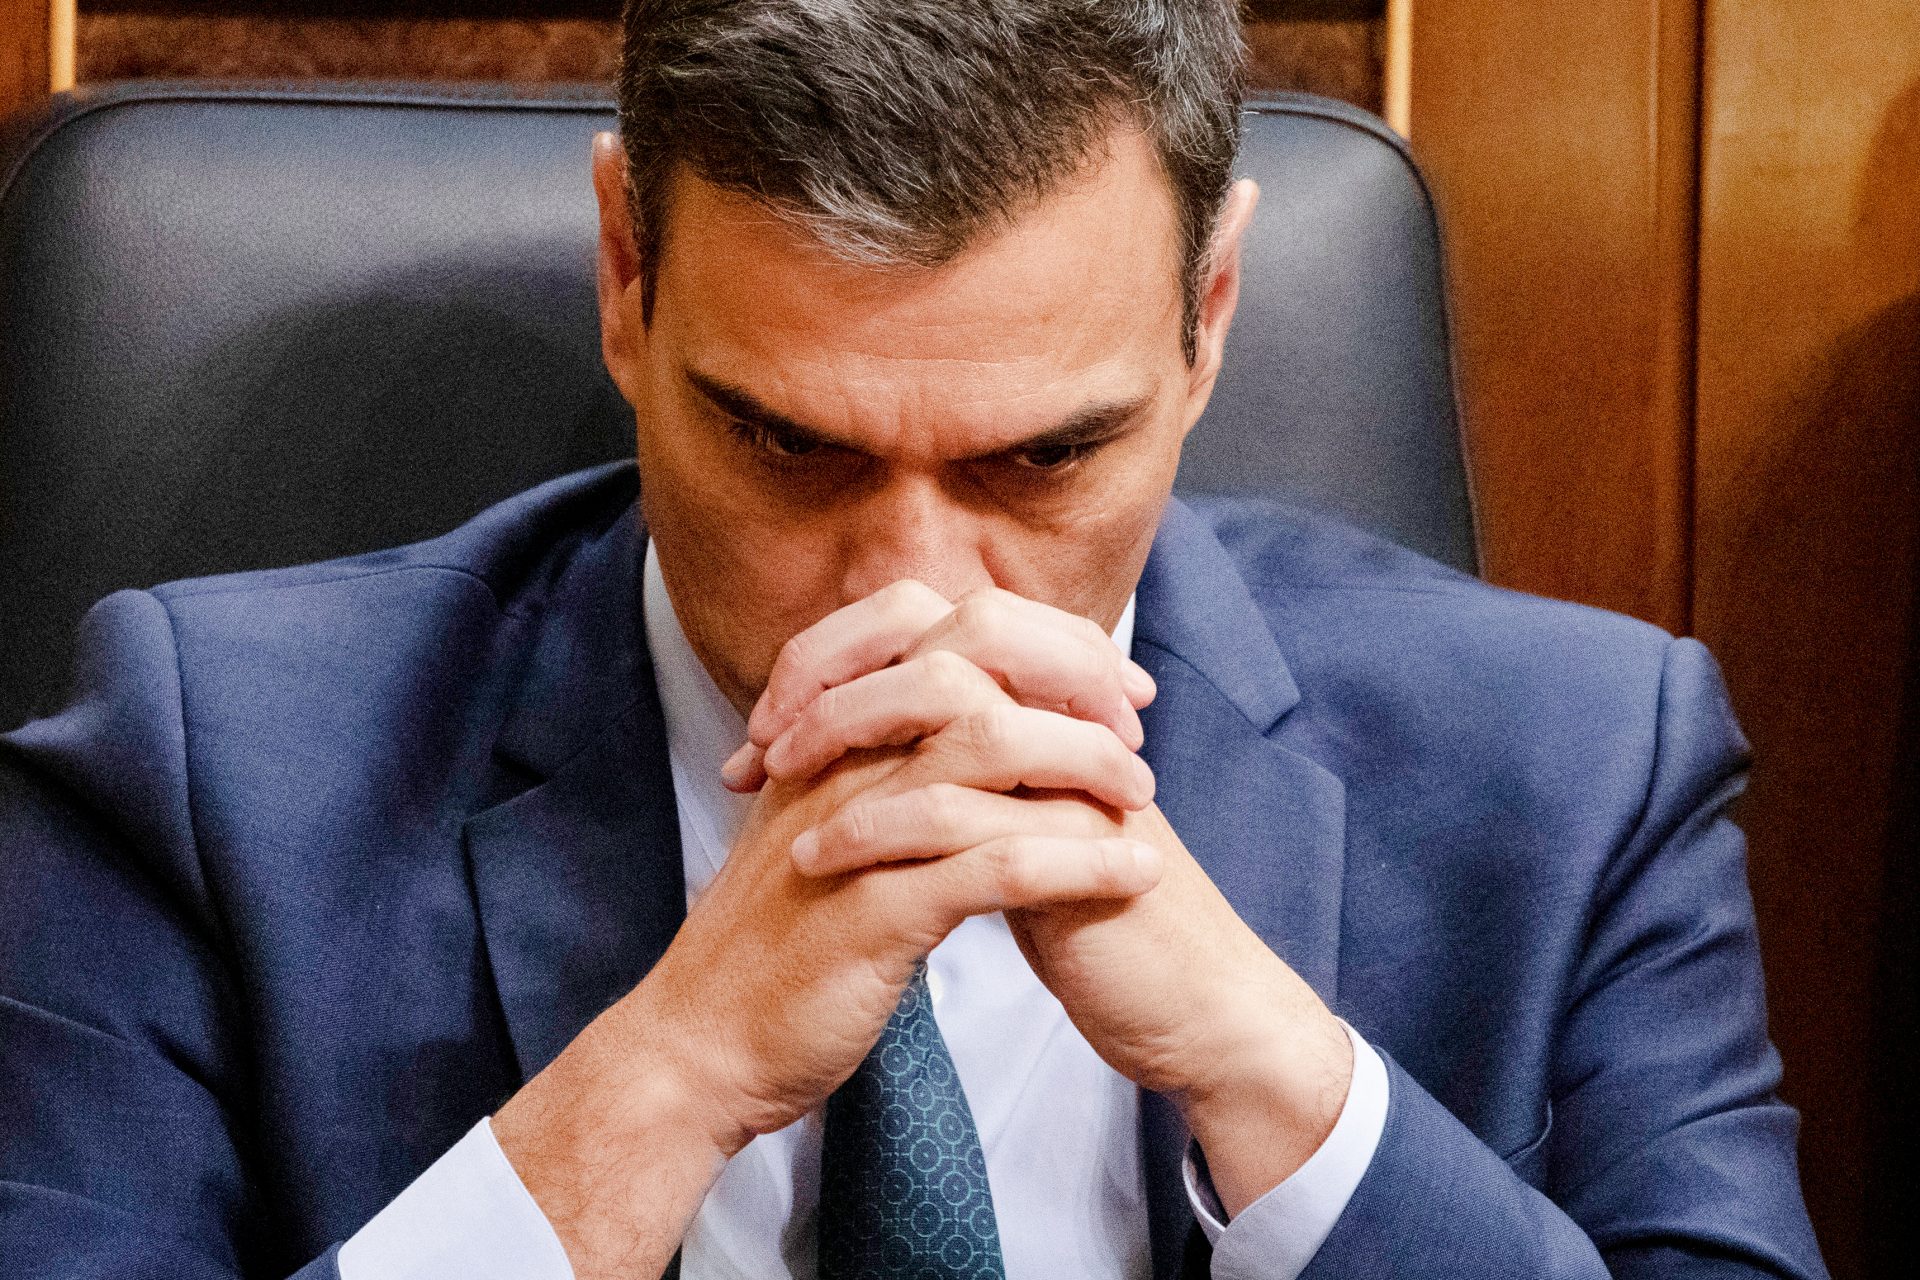 Why is Spanish president Pedro Sánchez considering resigning?